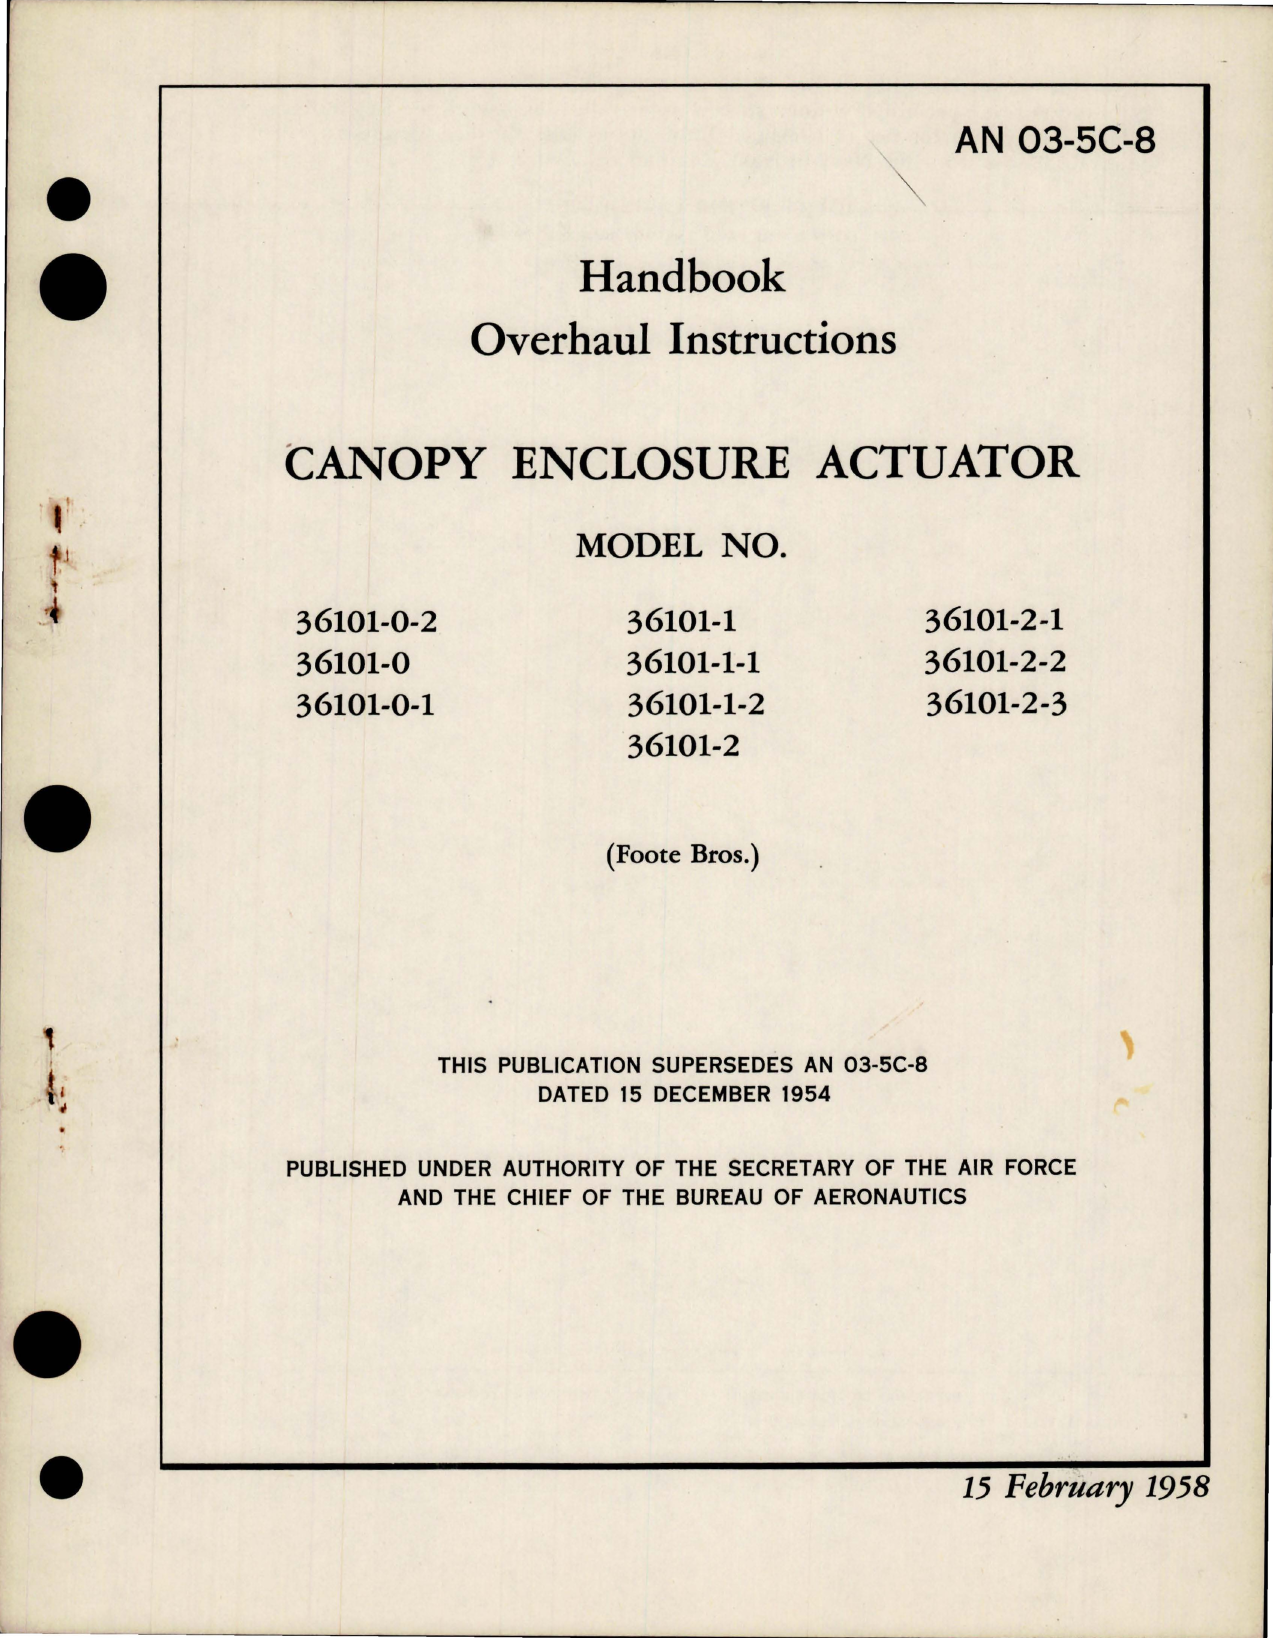 Sample page 1 from AirCorps Library document: Overhaul Instructions for Canopy Enclosure Actuator